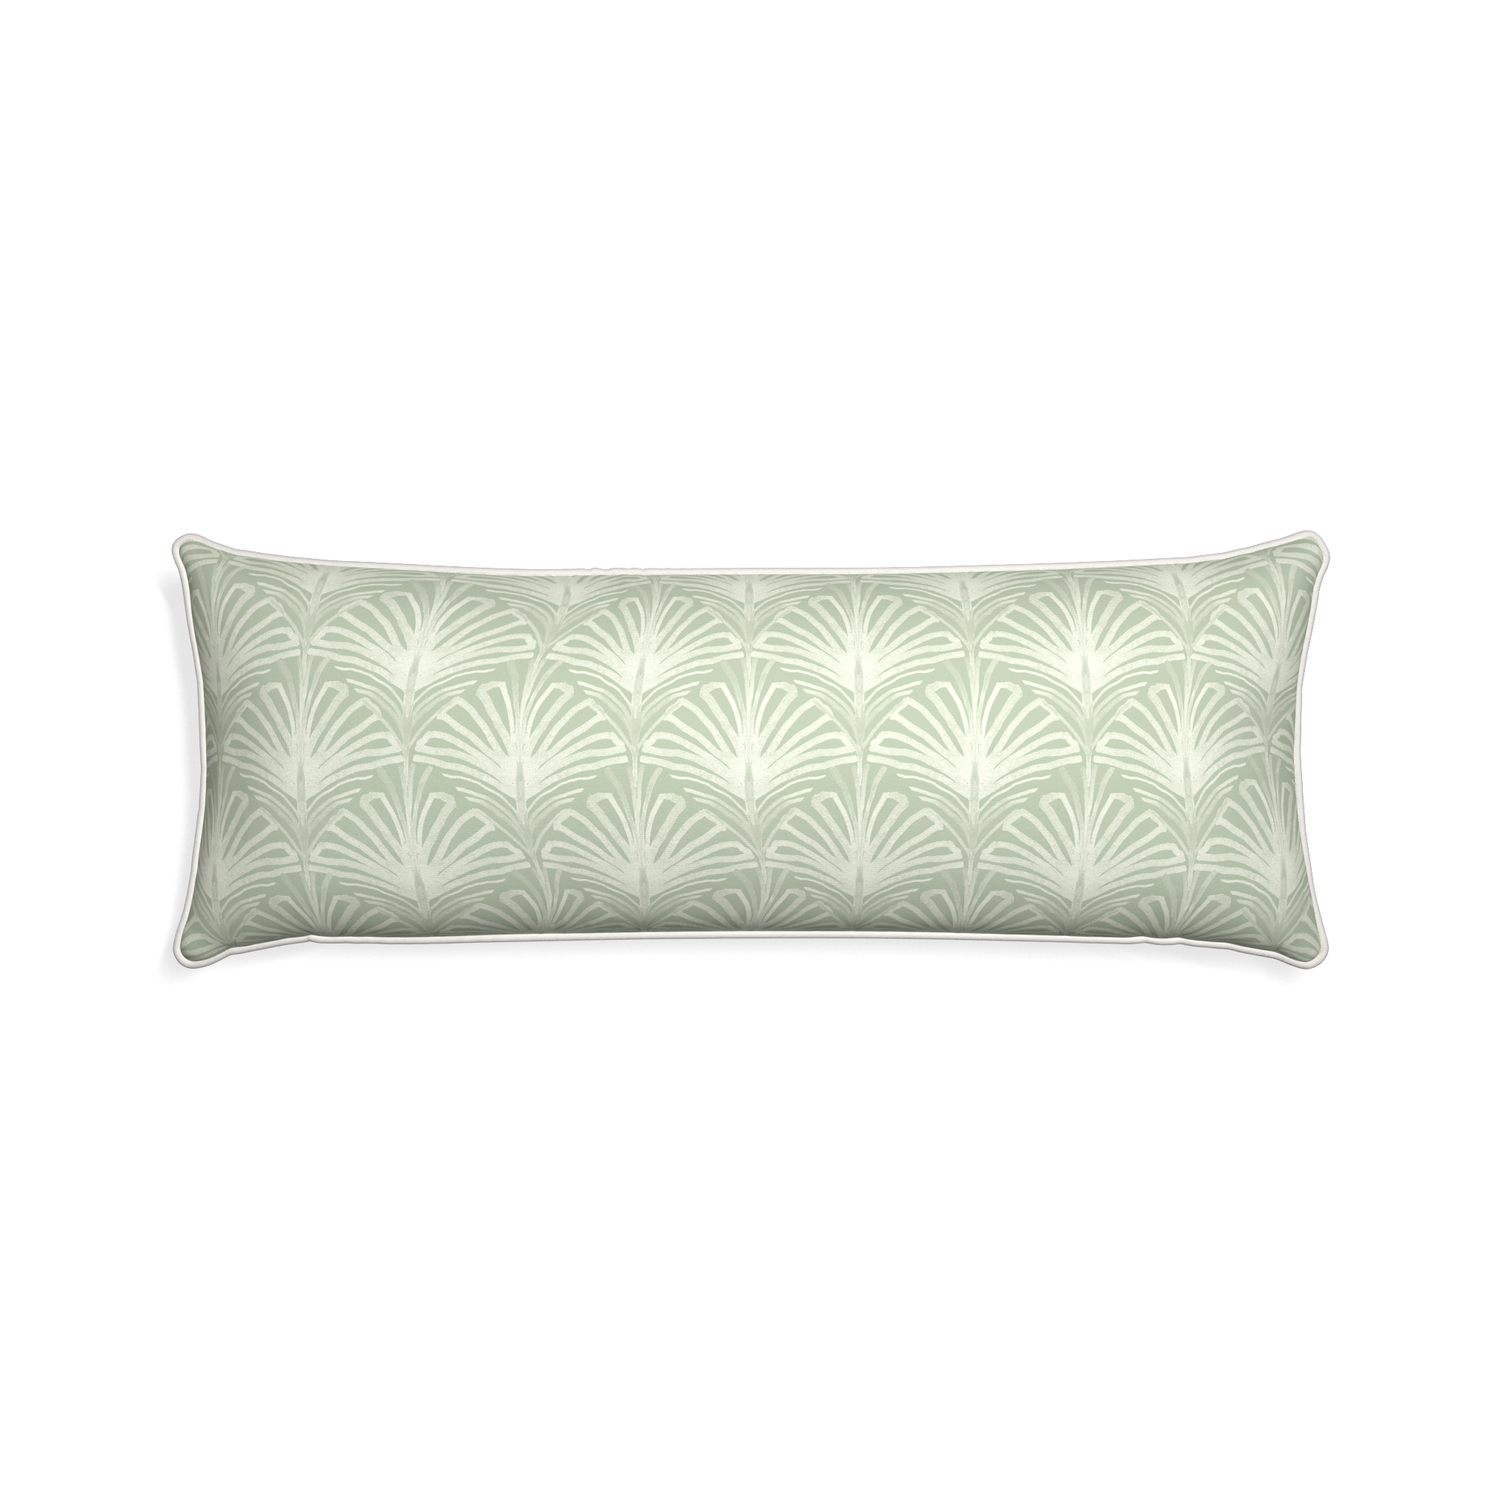 Xl-lumbar suzy sage custom sage green palmpillow with snow piping on white background